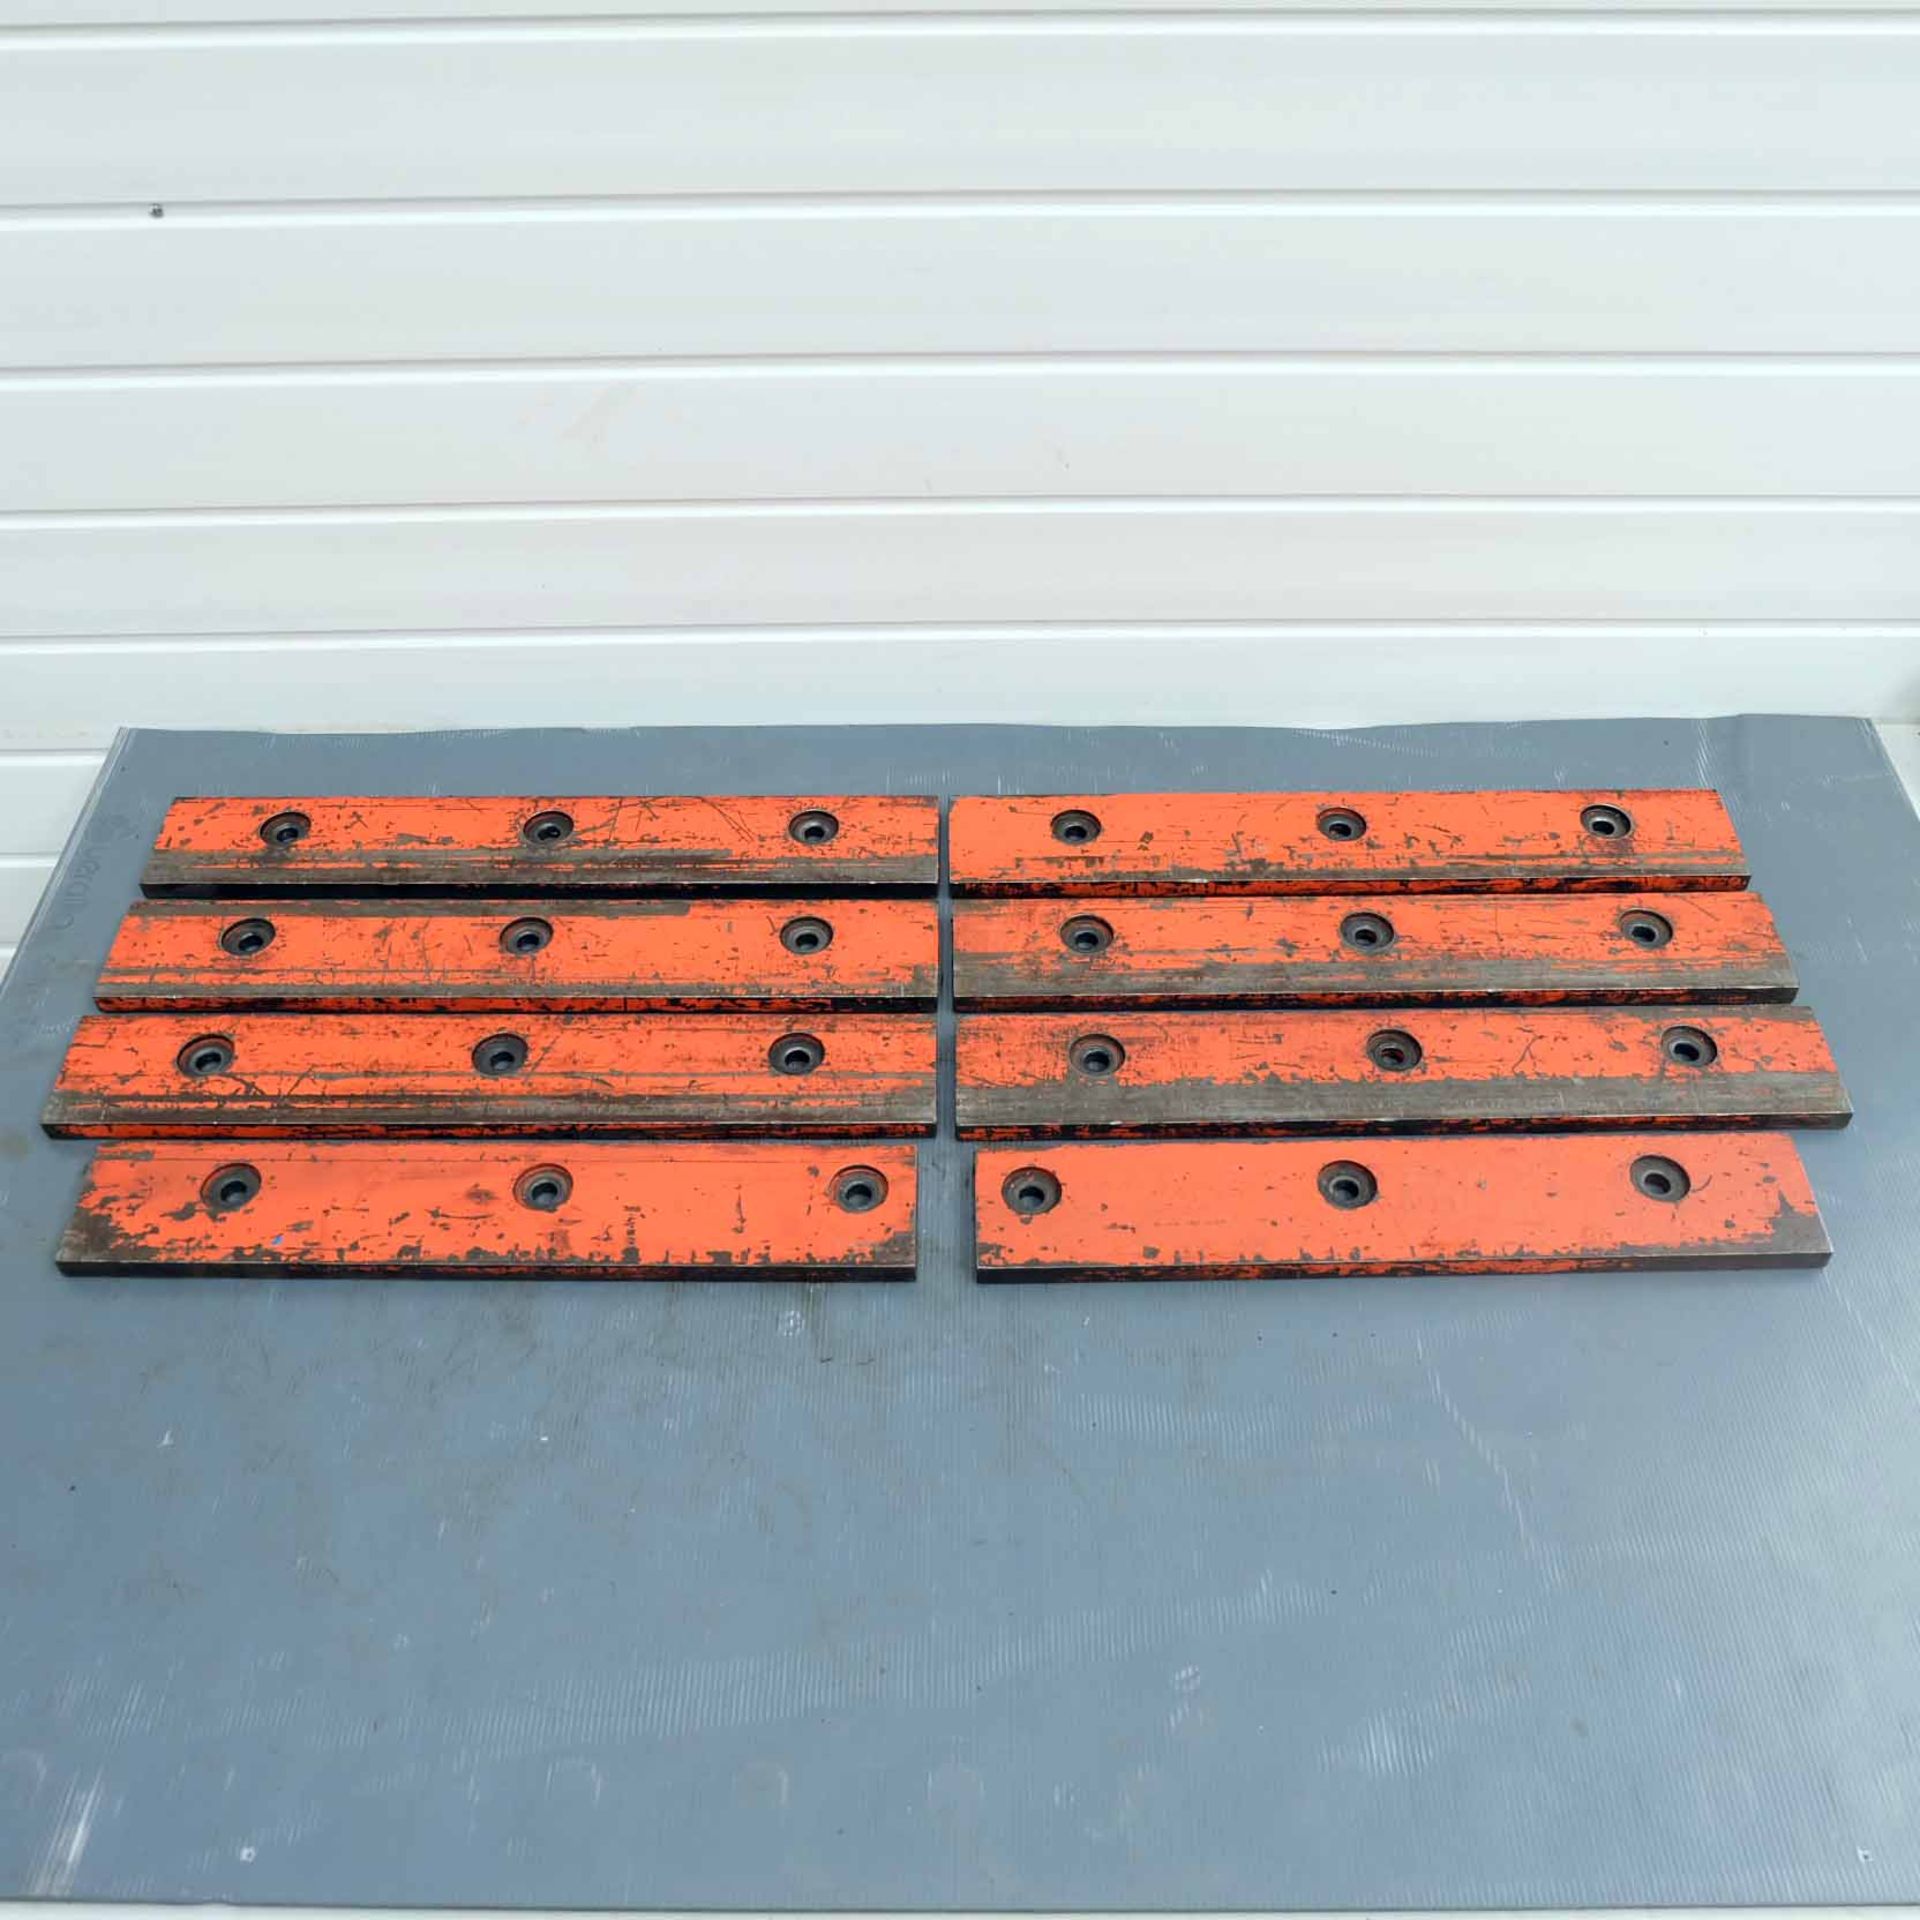 Set of 7 Top Tool Clamps for Press Brakes. 6 x 500mm Long. 2 x 450mm Long.